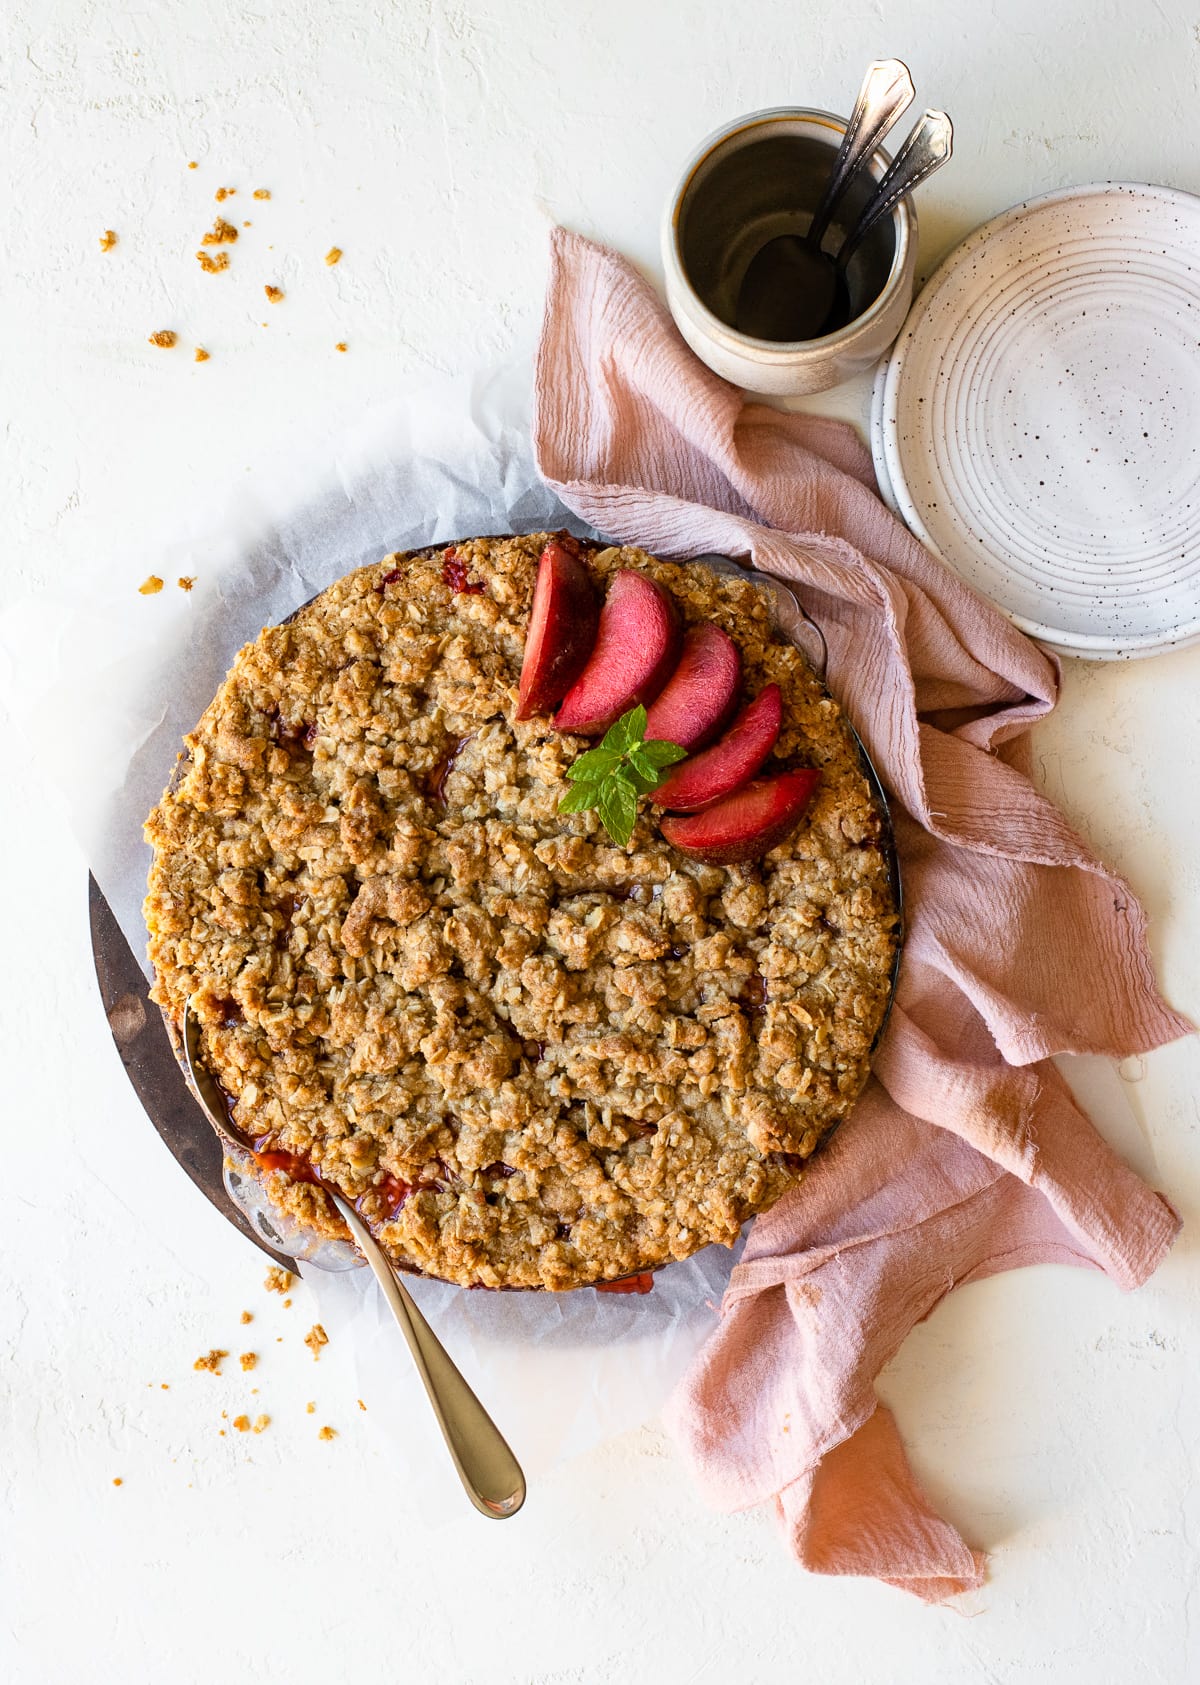 Fruit crumble baked in a pie dish, topped with plumogranite slices and a mint garnish.